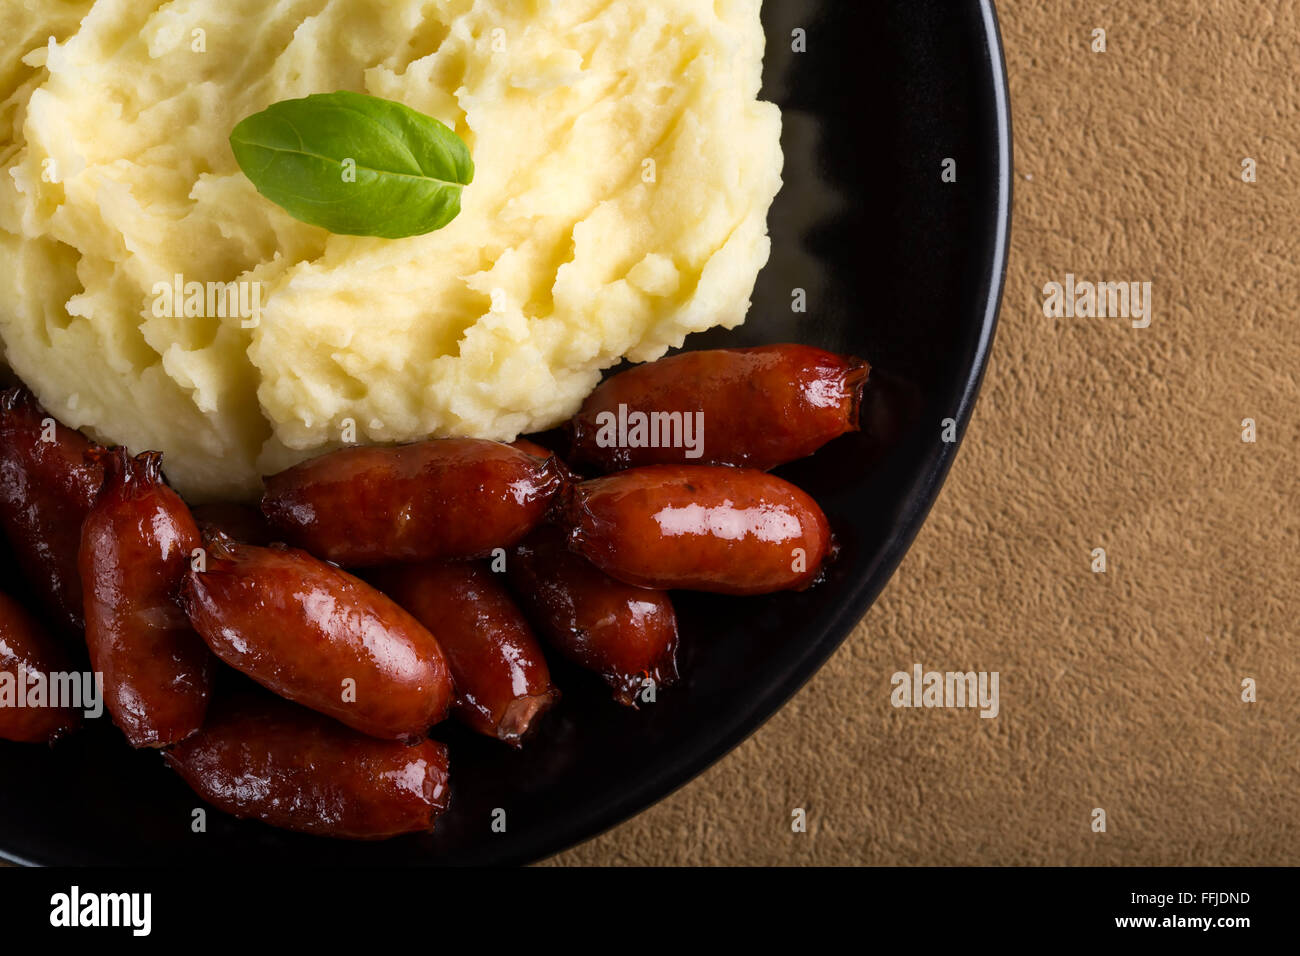 Sausage with mashed potatoes on dark plate Stock Photo